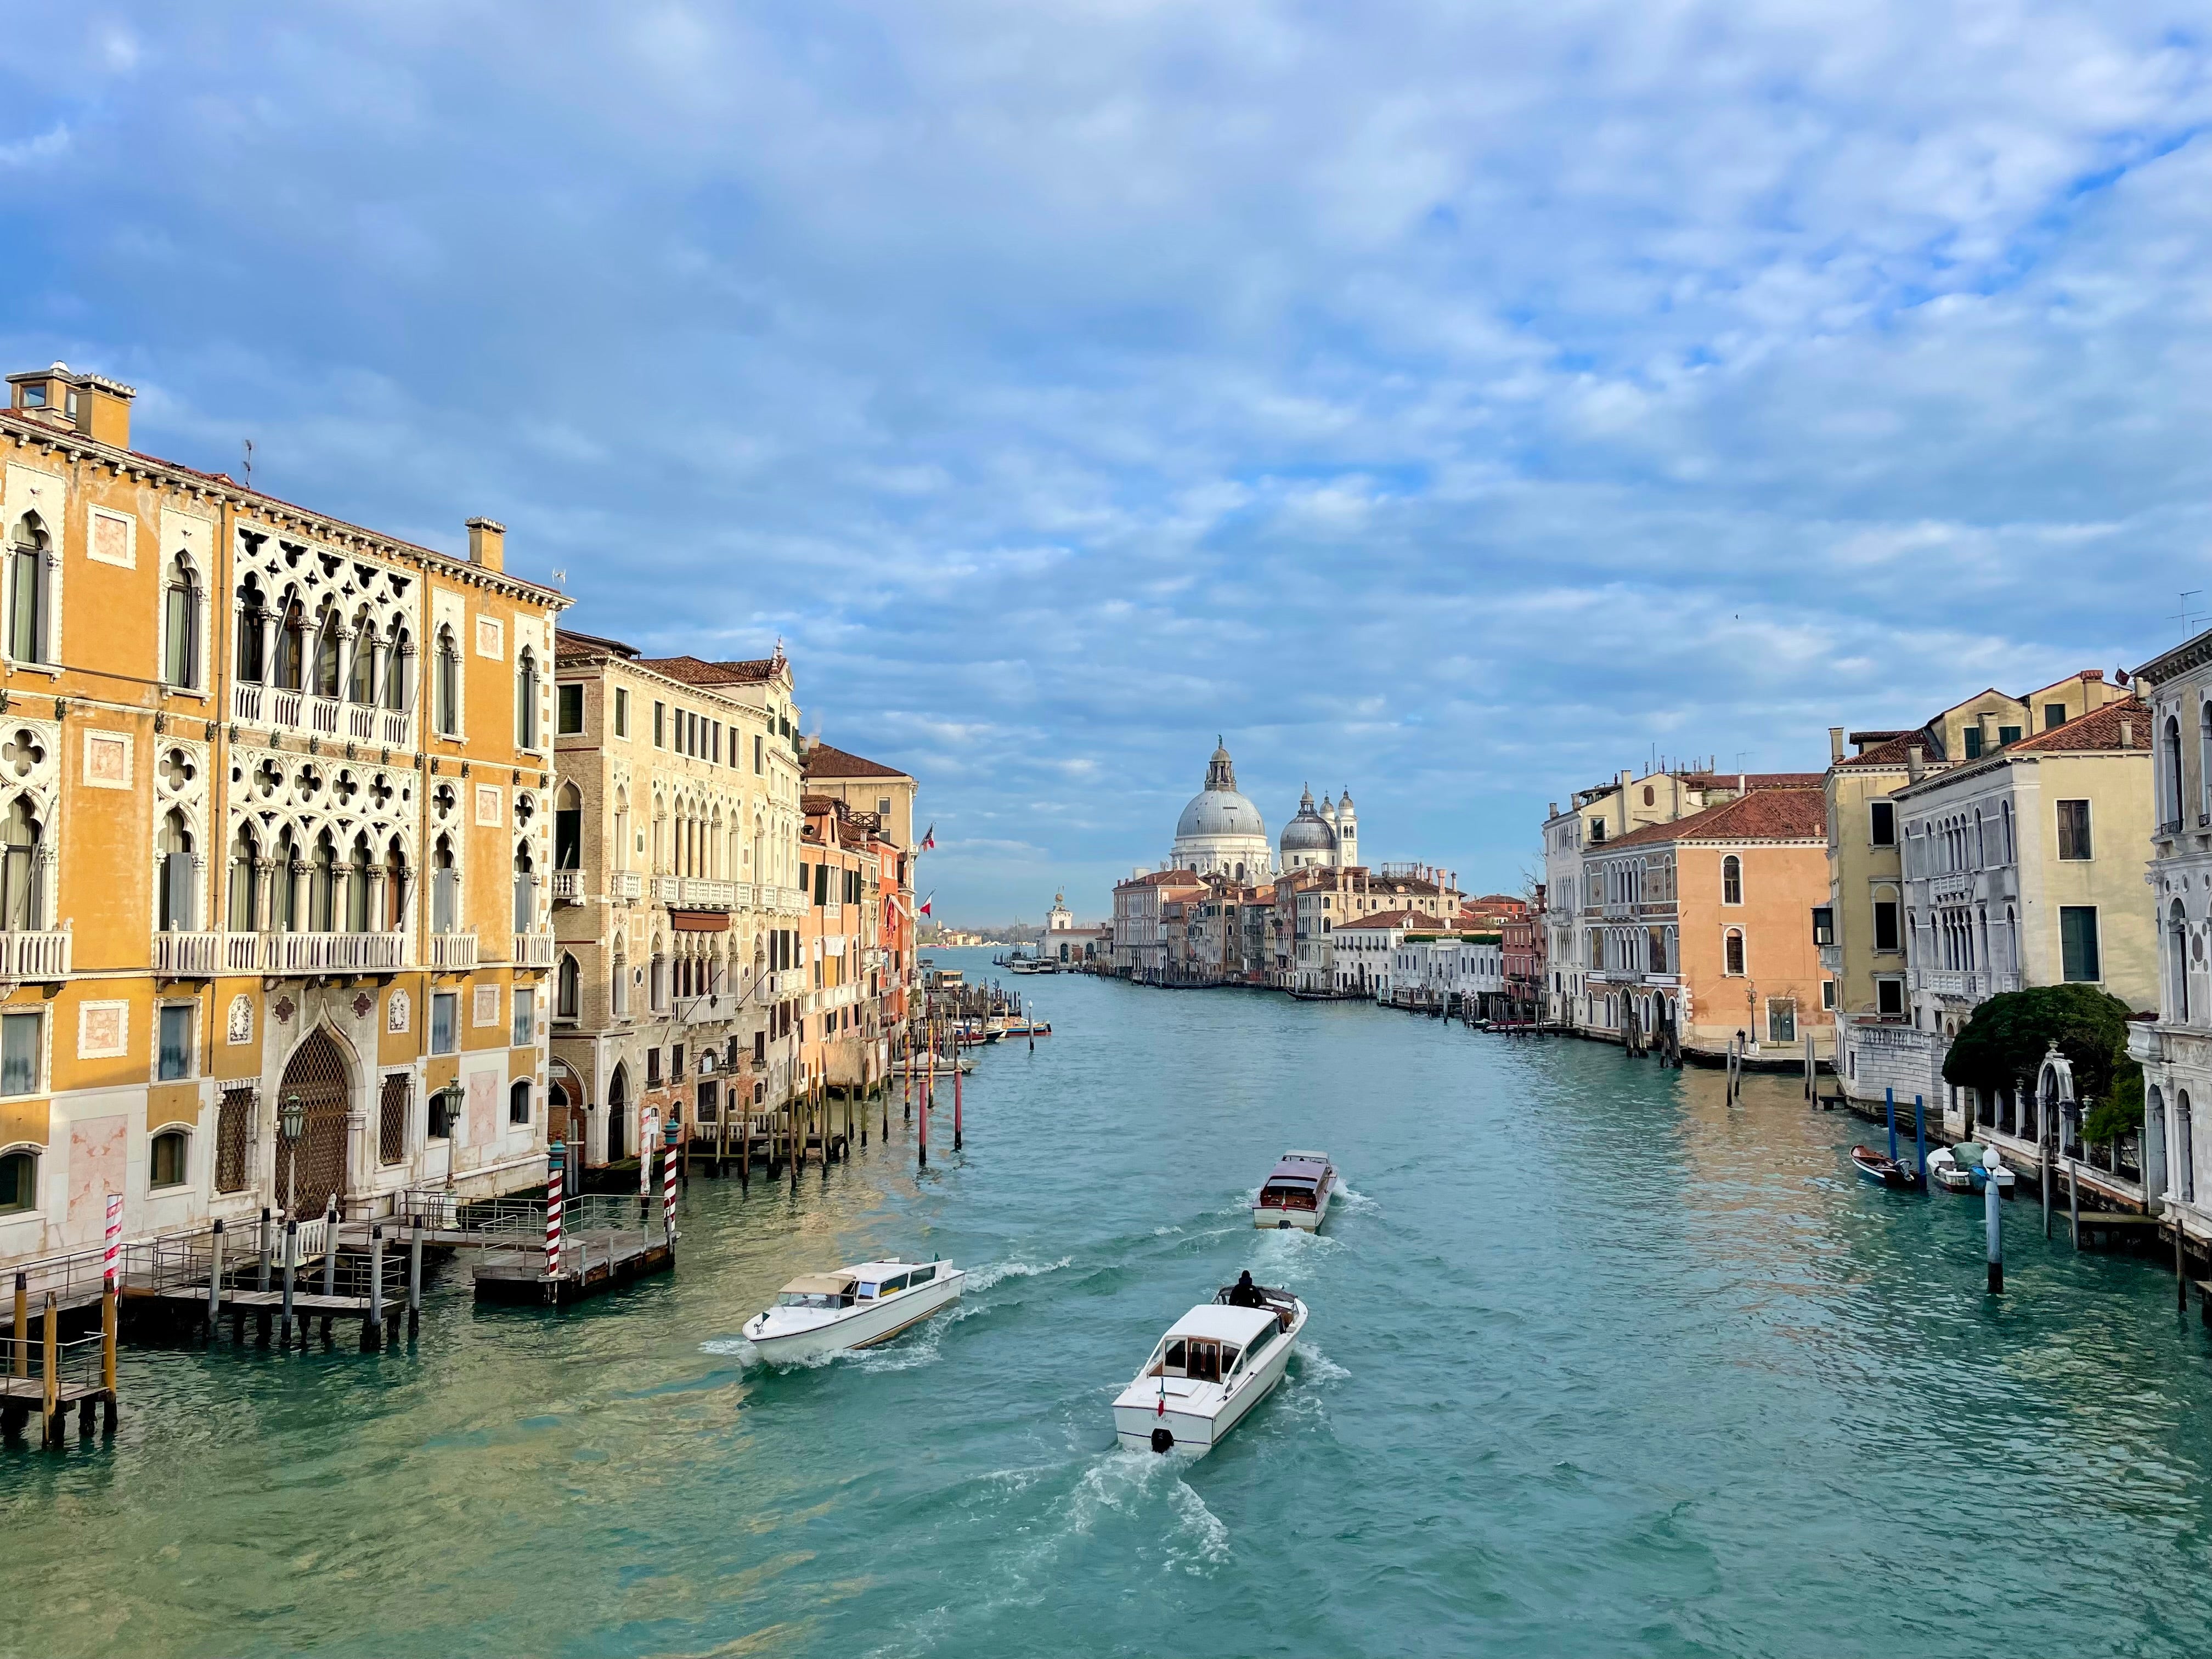 The Grand Canal viewed from the Ponte dell’Accademia